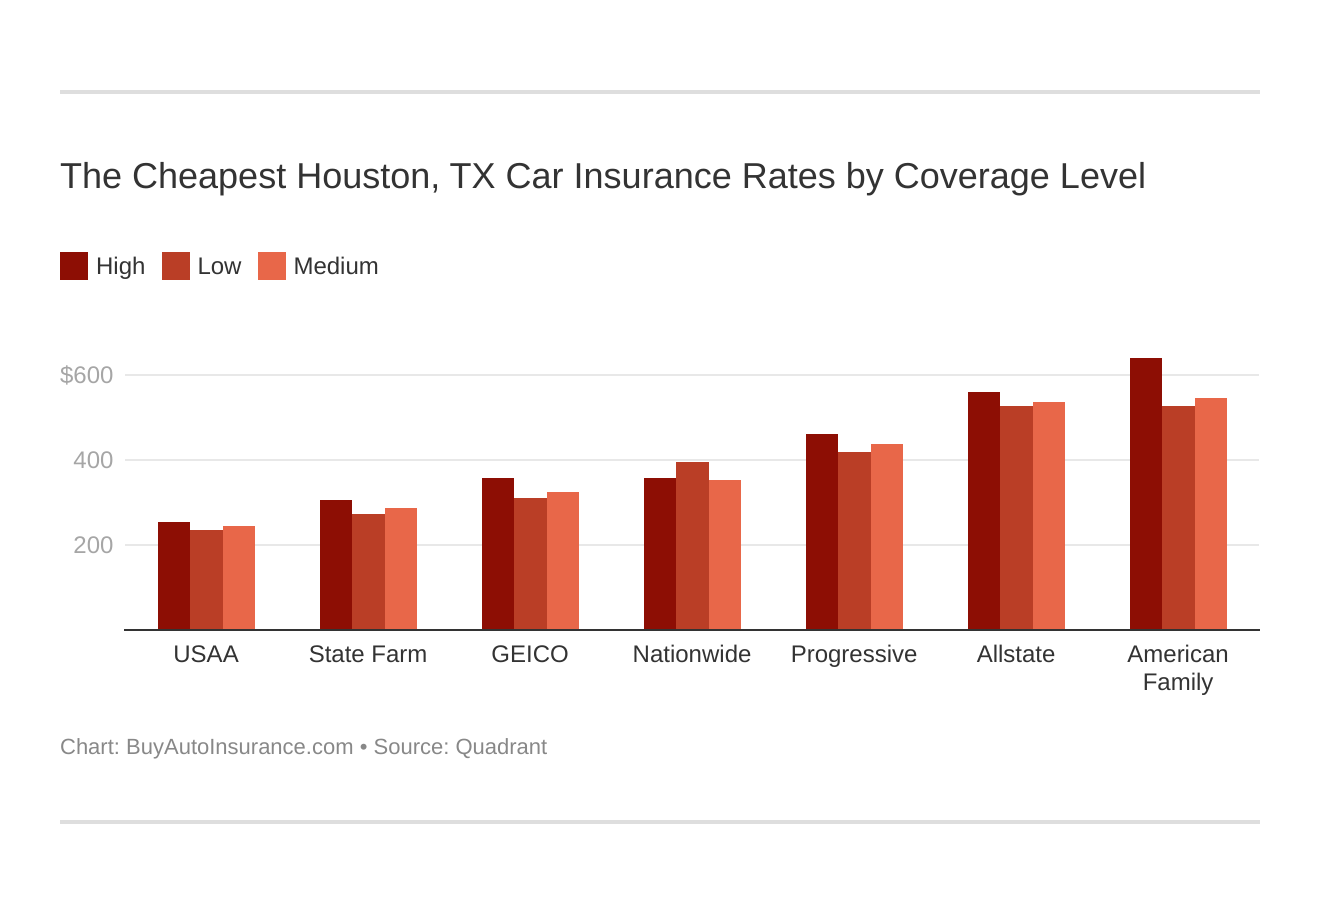 The Cheapest Houston, TX Car Insurance Rates by Coverage Level